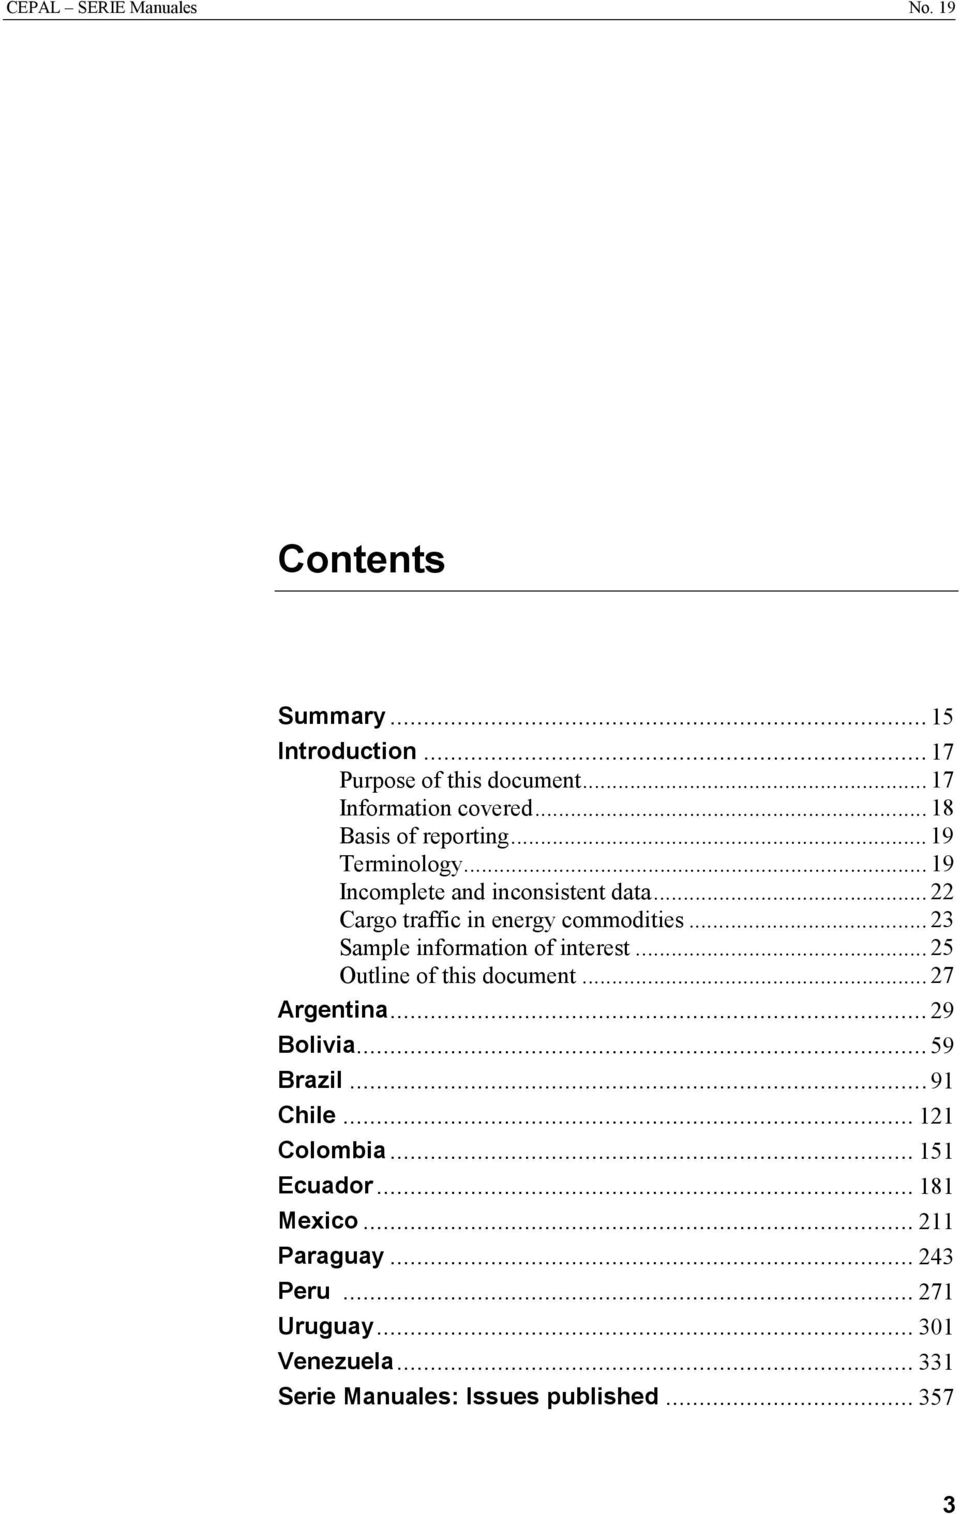 .. 23 Sample information of interest... 25 Outline of this document... 27 Argentina...29 Bolivia...59 Brazil...91 Chile.